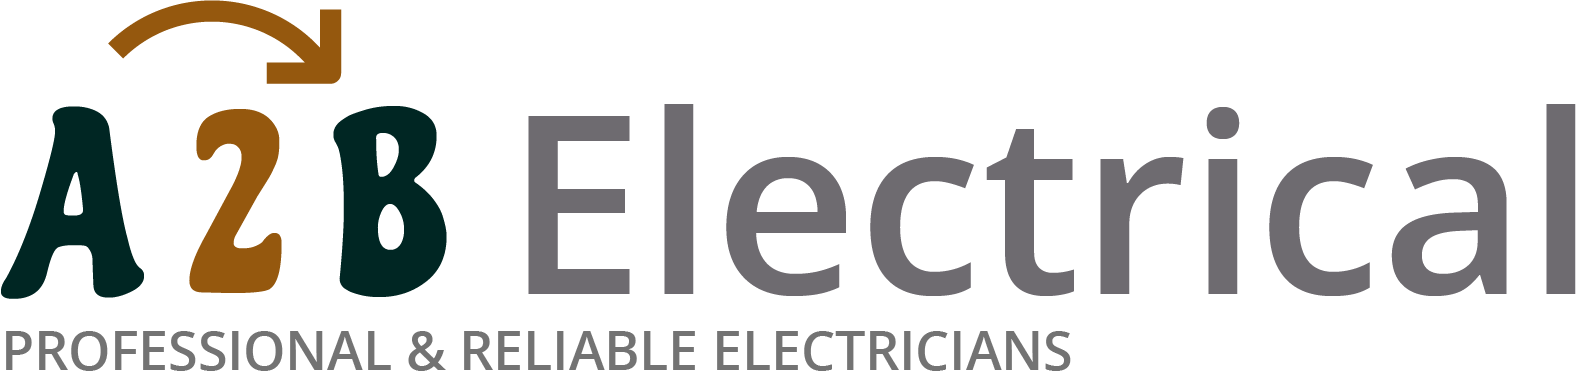 If you have electrical wiring problems in Slough, we can provide an electrician to have a look for you. 